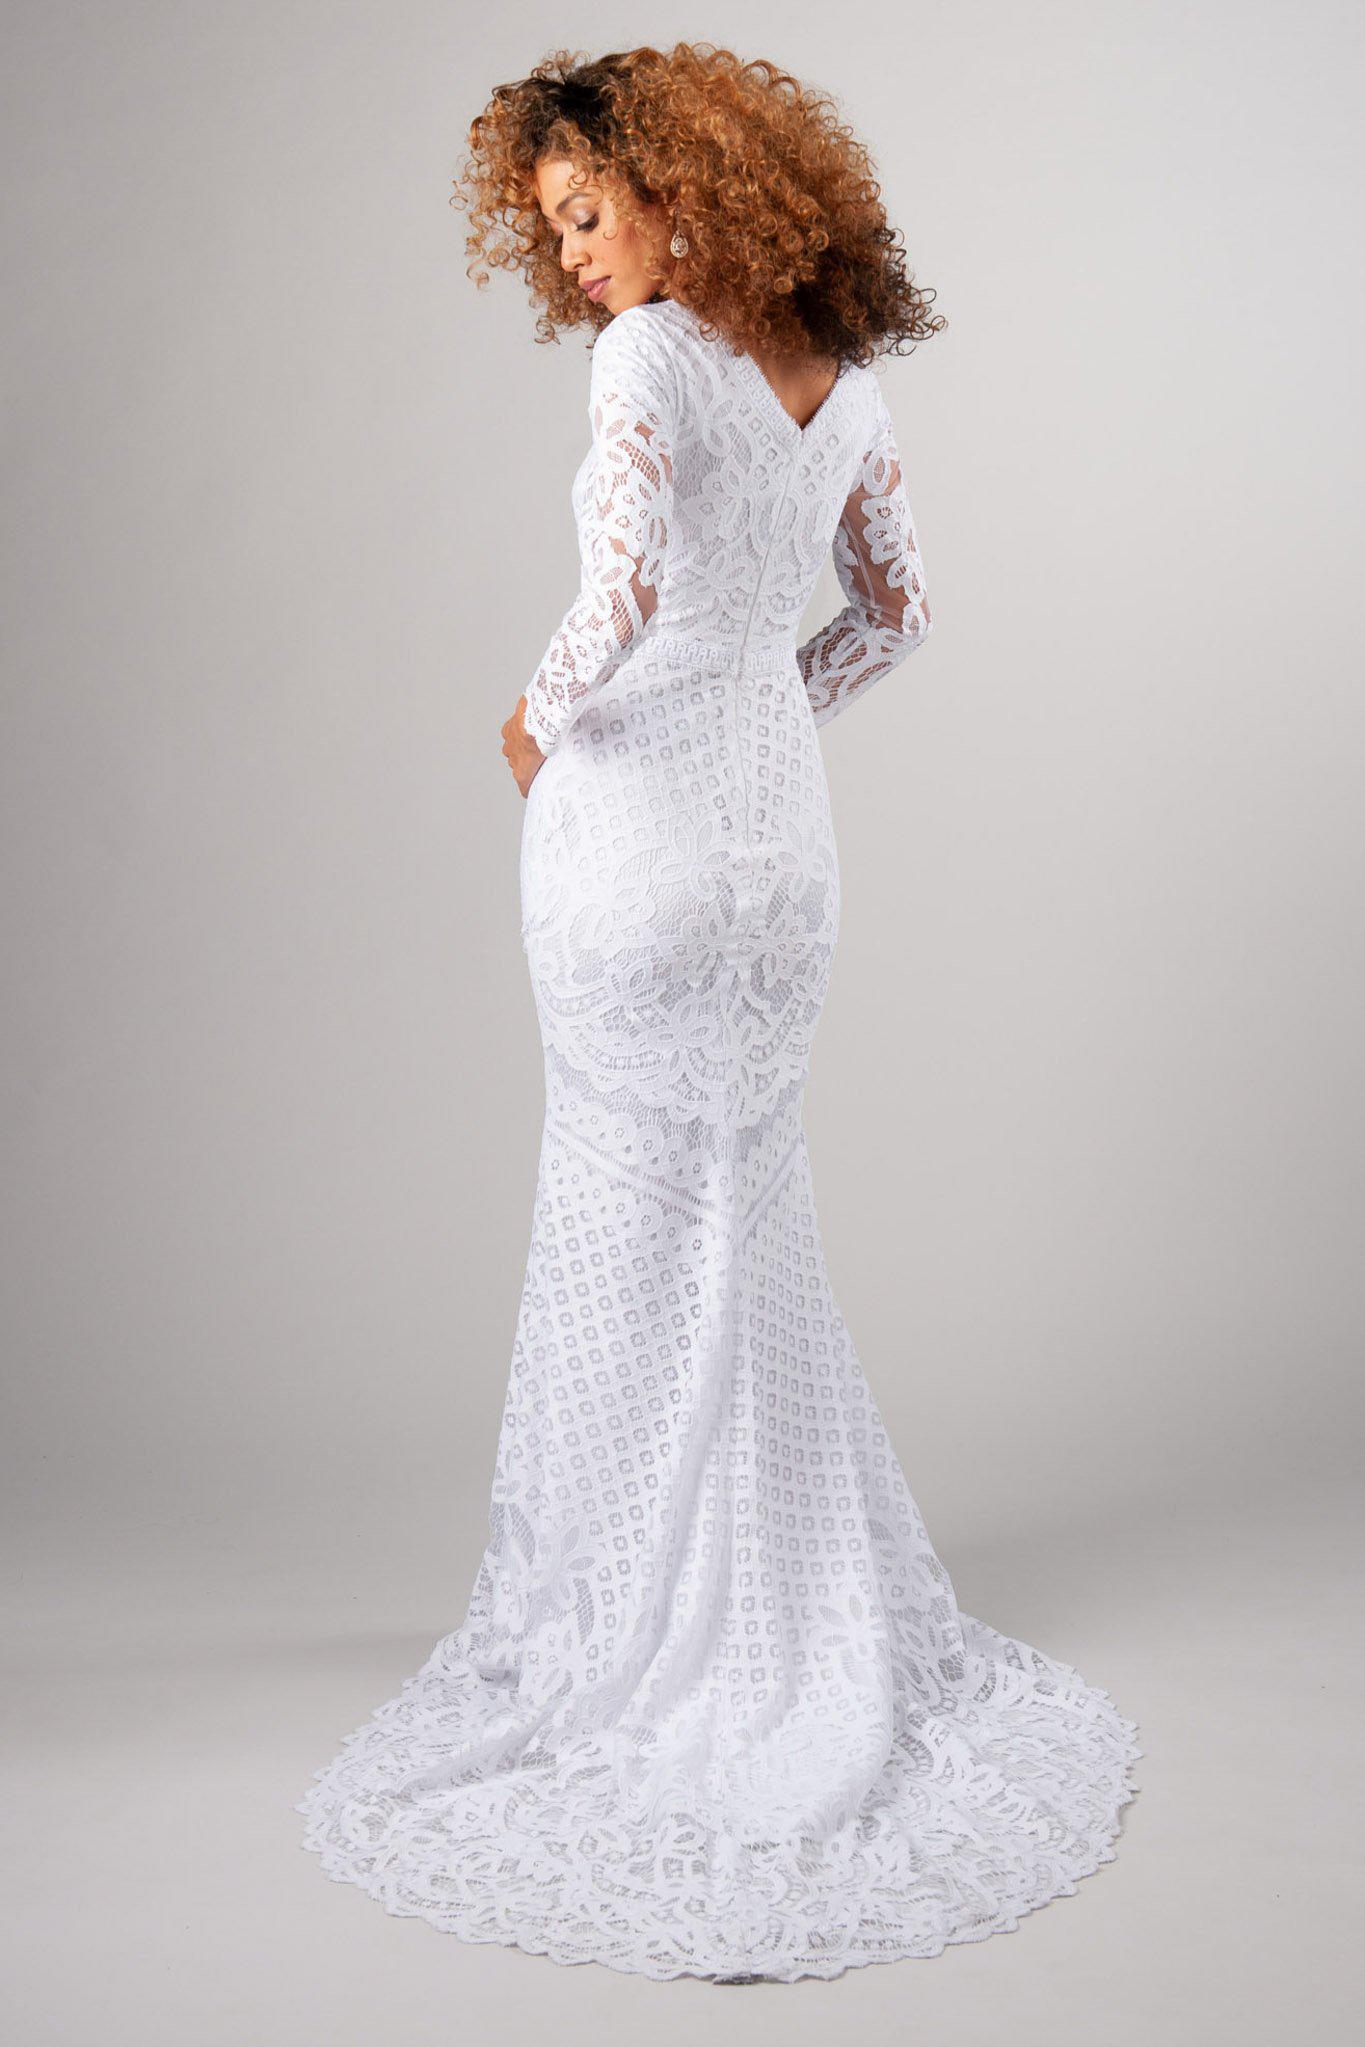 Back of Lace wedding gown with long sleeves, style Lorna, is part of the Wedding Collection of LatterDayBride, a Salt Lake City bridal shop.